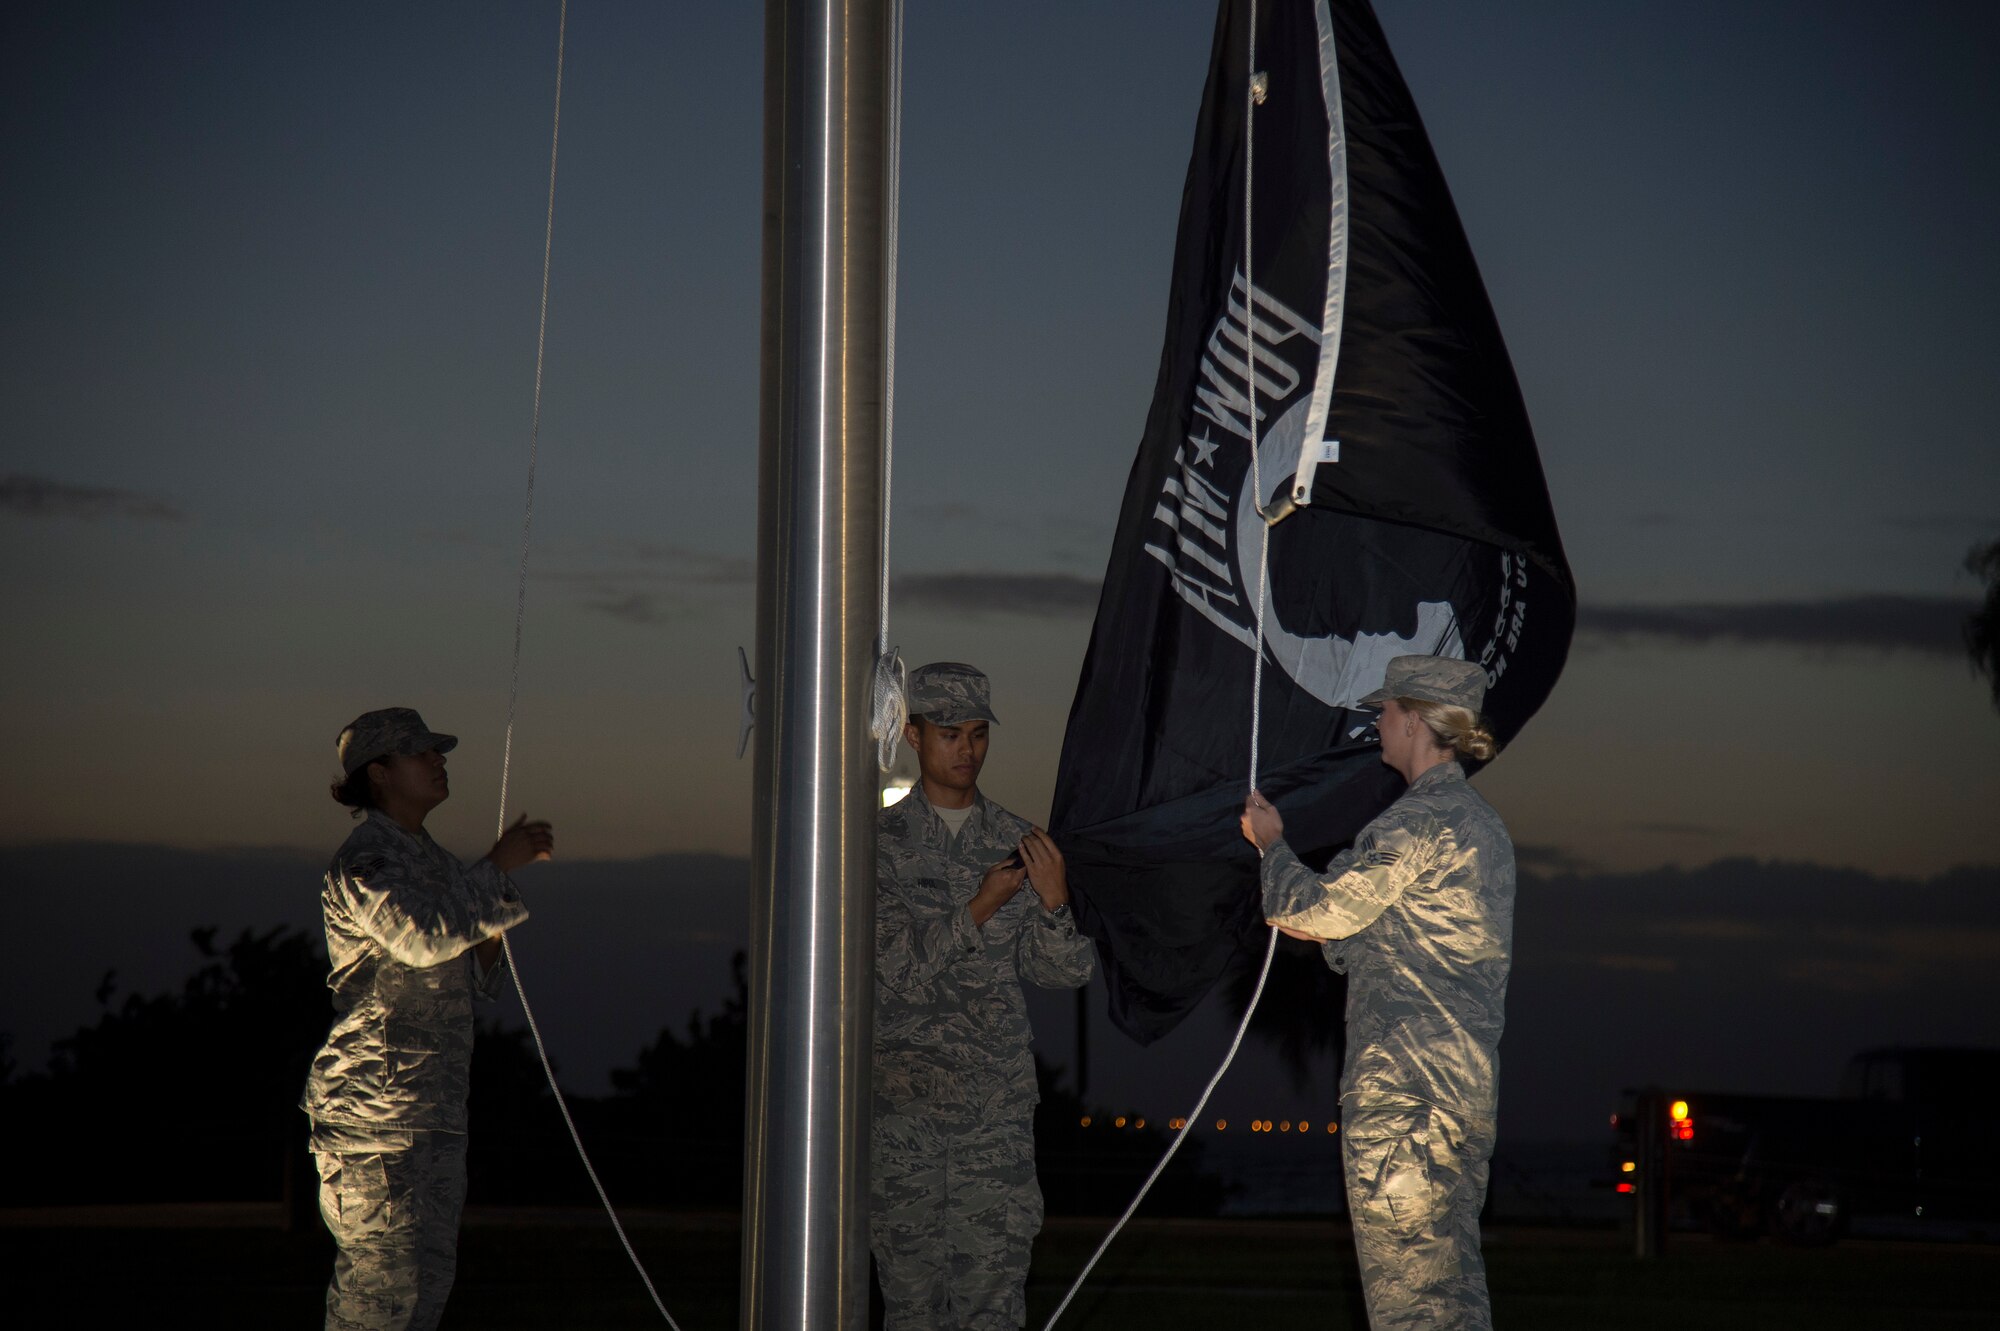 U.S. Air Force Senior Airman Karina Rodriguez (left), Airman 1st Class Dyllan Hipol (center), and Senior Airman Andrea Stutts (right), MacDill Air Force Base honor guardsmen, raise the POW/ MIA Flag Sept. 20, 2019, at MacDill AFB, Fla.  POW/MIA Recognition Day is commemorated nationally on the third Friday of every September in honor of service members who were prisoners of war as well as those are missing in action. (U.S. Air Force photo by Airman 1st Class Shannon Bowman)